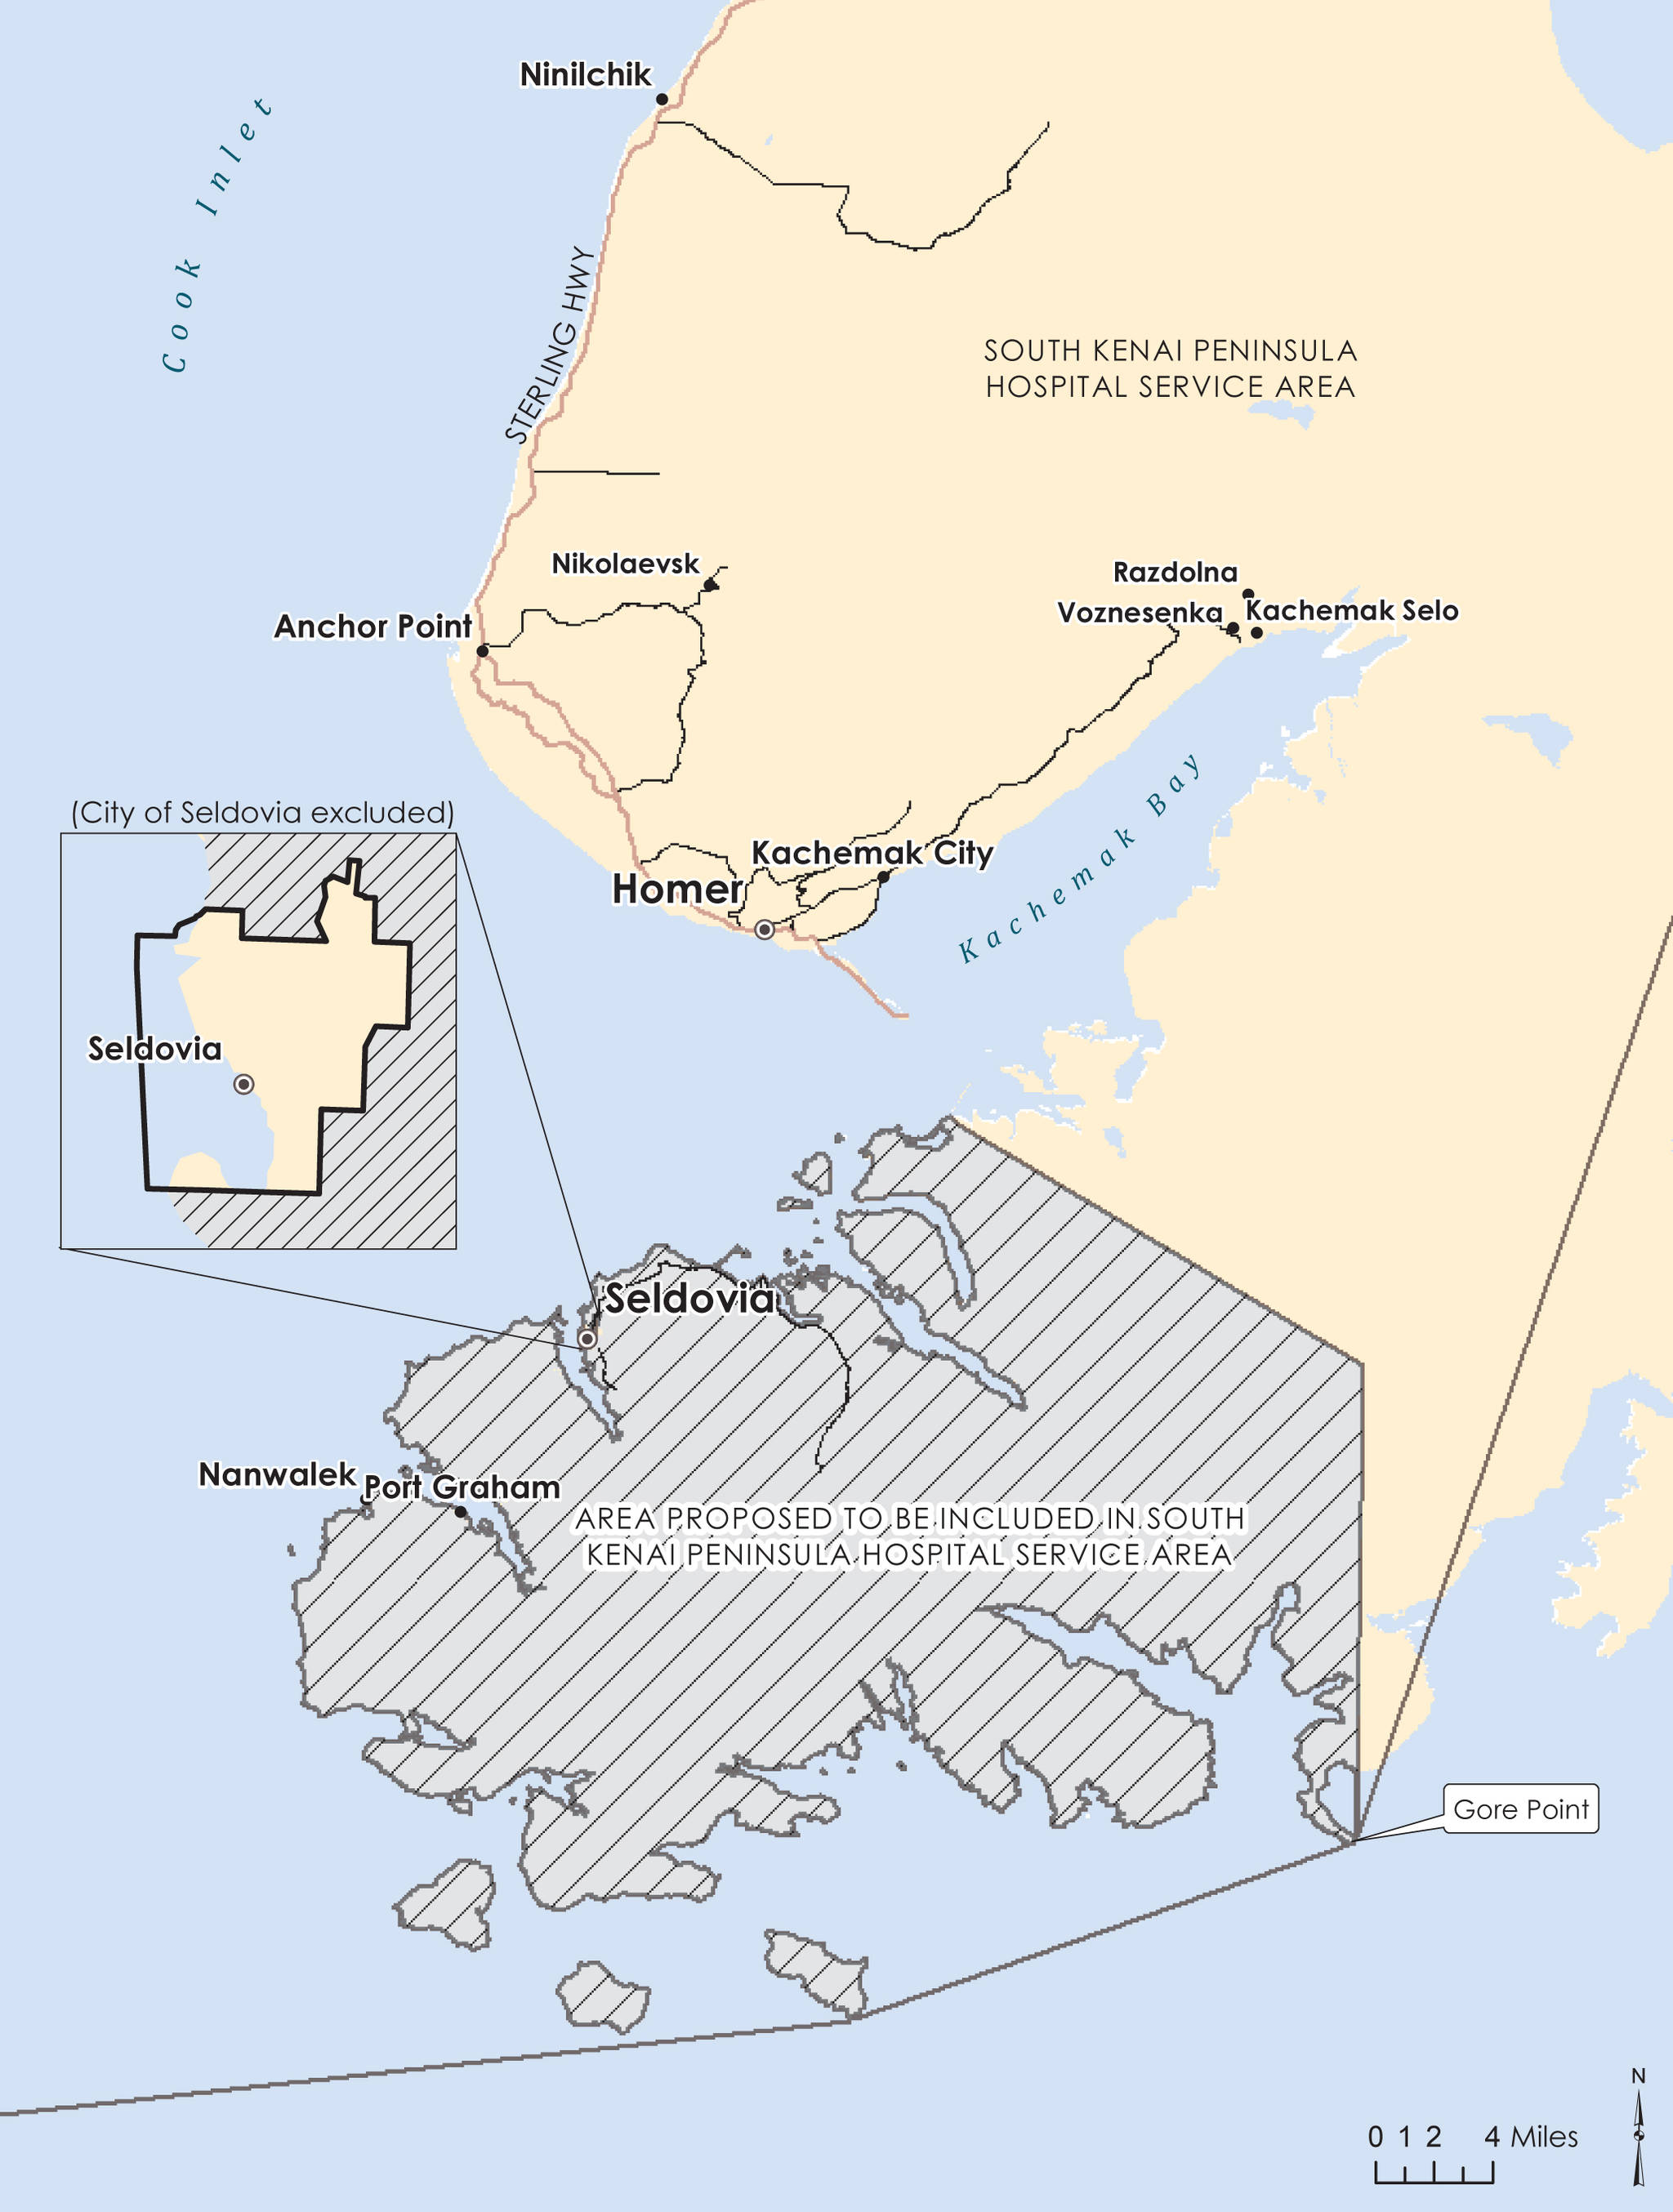 <span class="neFMT neFMT_PhotoCredit">Image courtesy Kenai Peninsula Borough</span>                                A map of the proposed boundary change in Proposition 3. The shaded area shows the boundary move and the new area to be included in the South Kenai Peninsula Hospital Service Area.